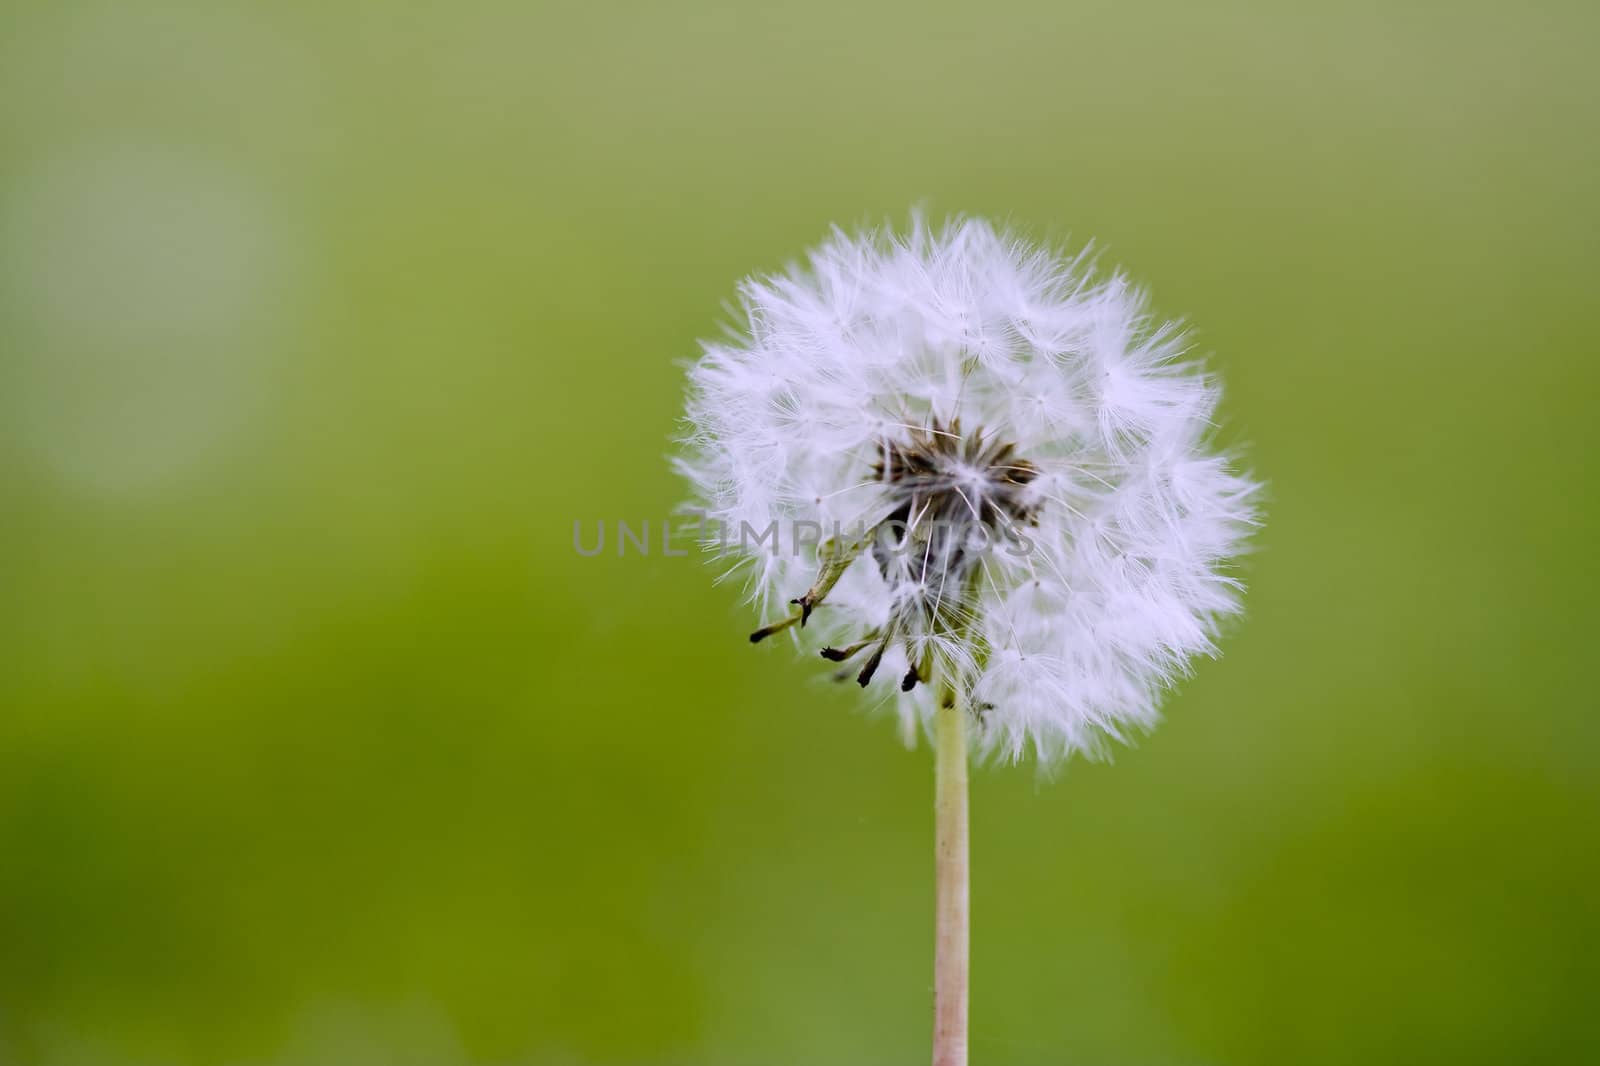 macro photo of a dandelion on a green grass background